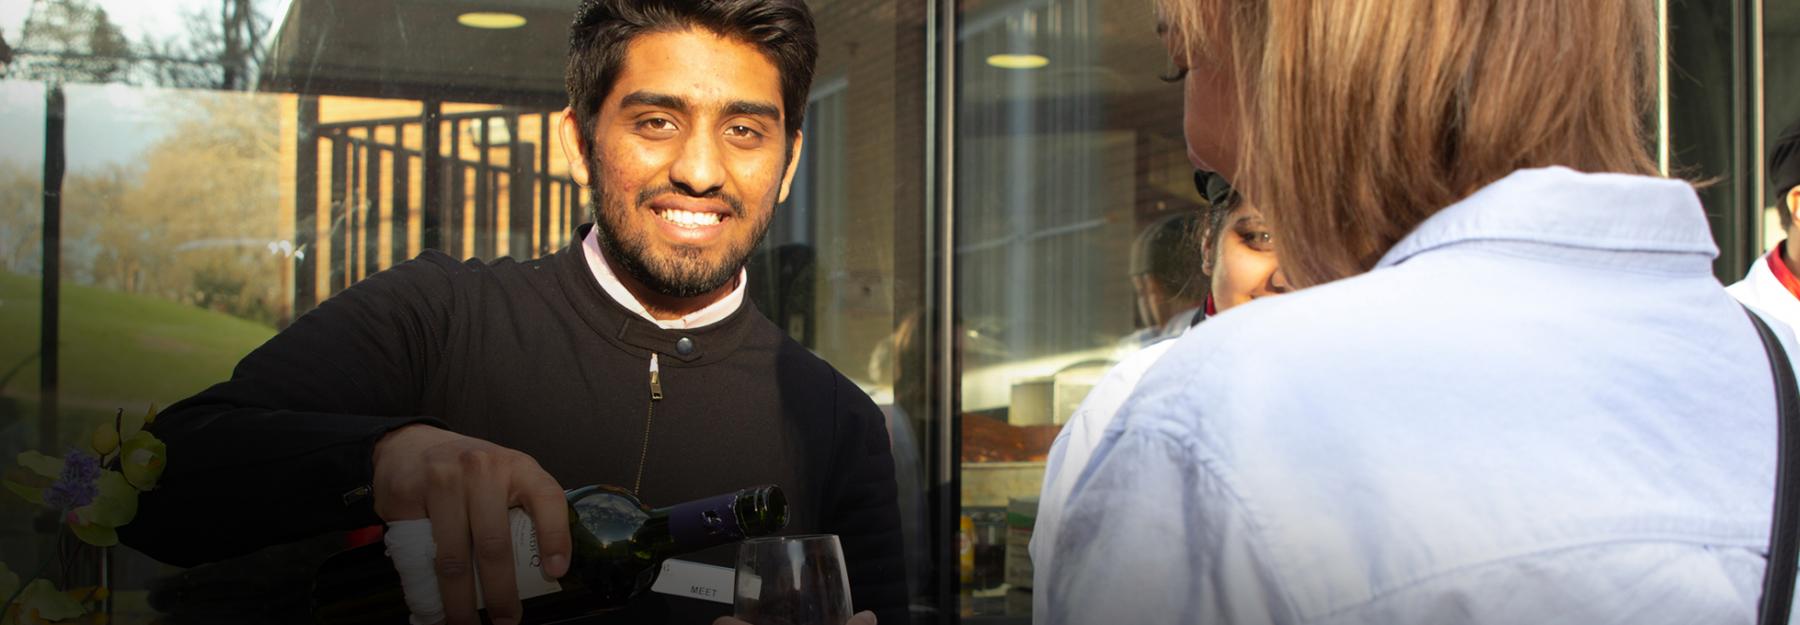 Hotel & Restaurant Management student serves wine to a guest